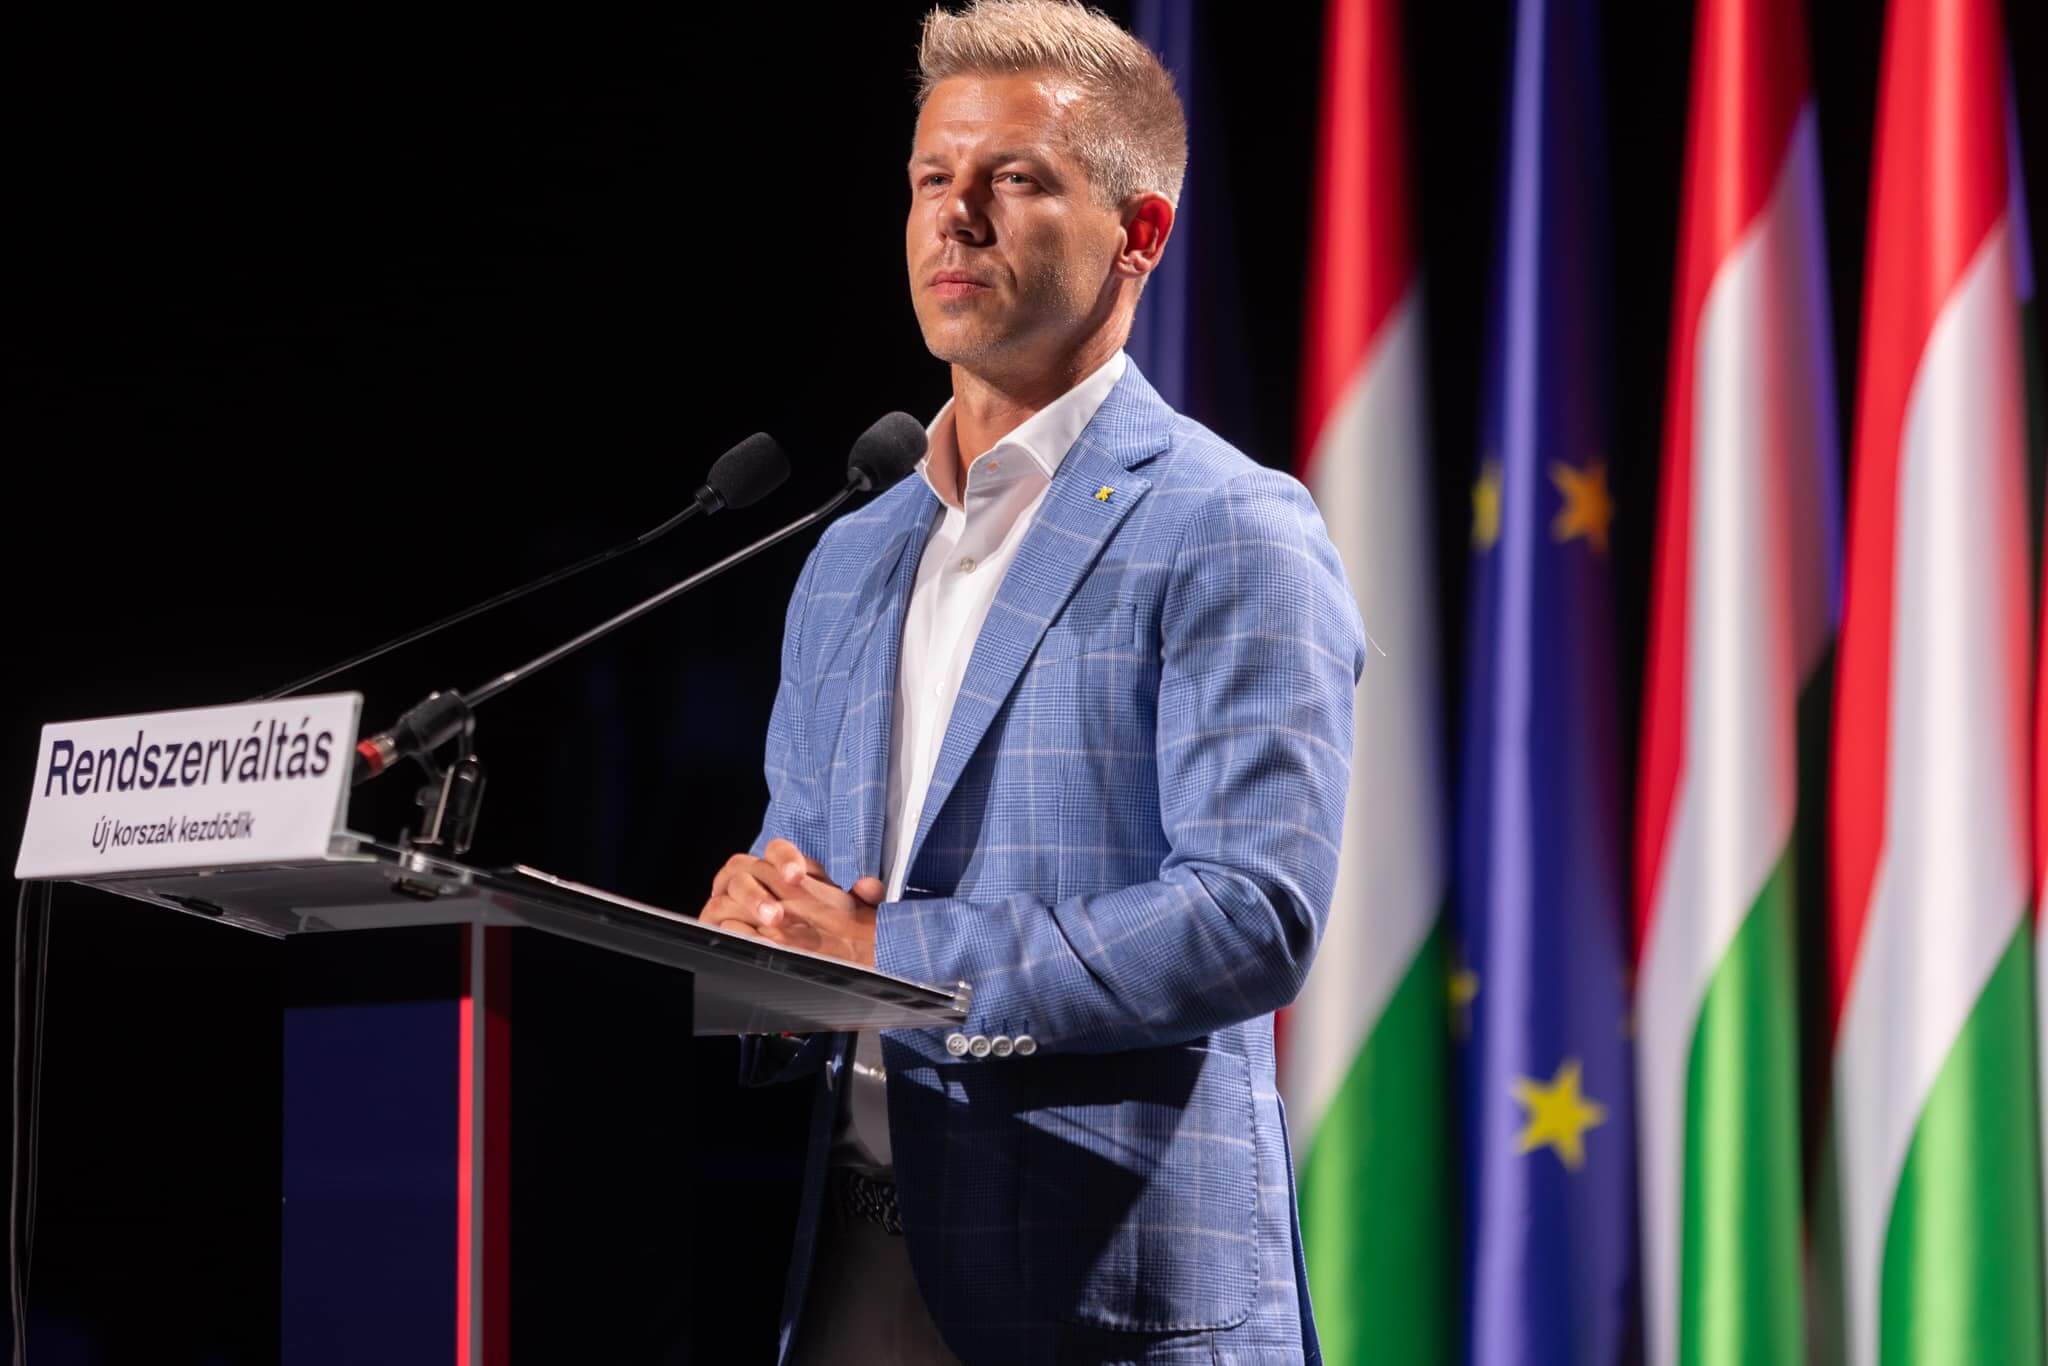 'Era Of Preparation to Topple Orbán Regime Starts', Says Magyar at Event in Budapest